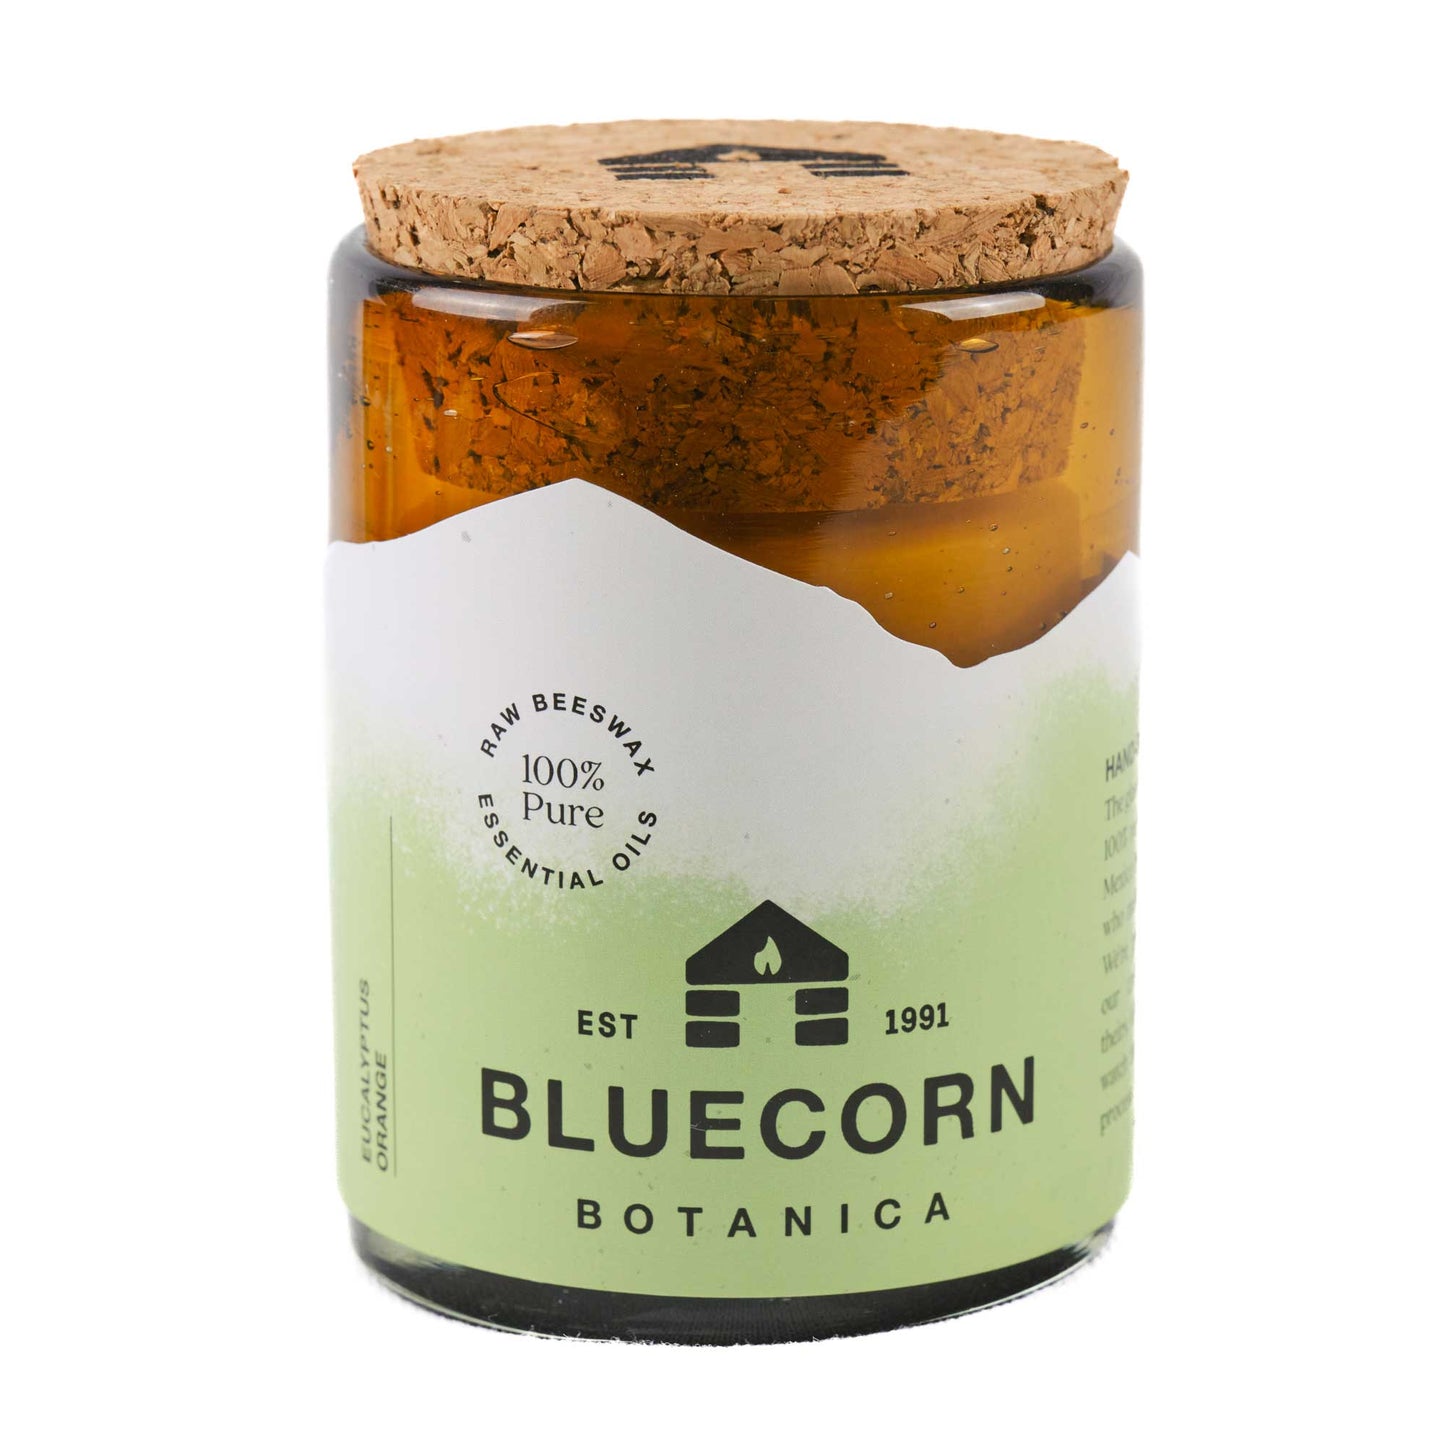 scented candle made from beeswax and essential oils poured into blown glass bluecorn candles 